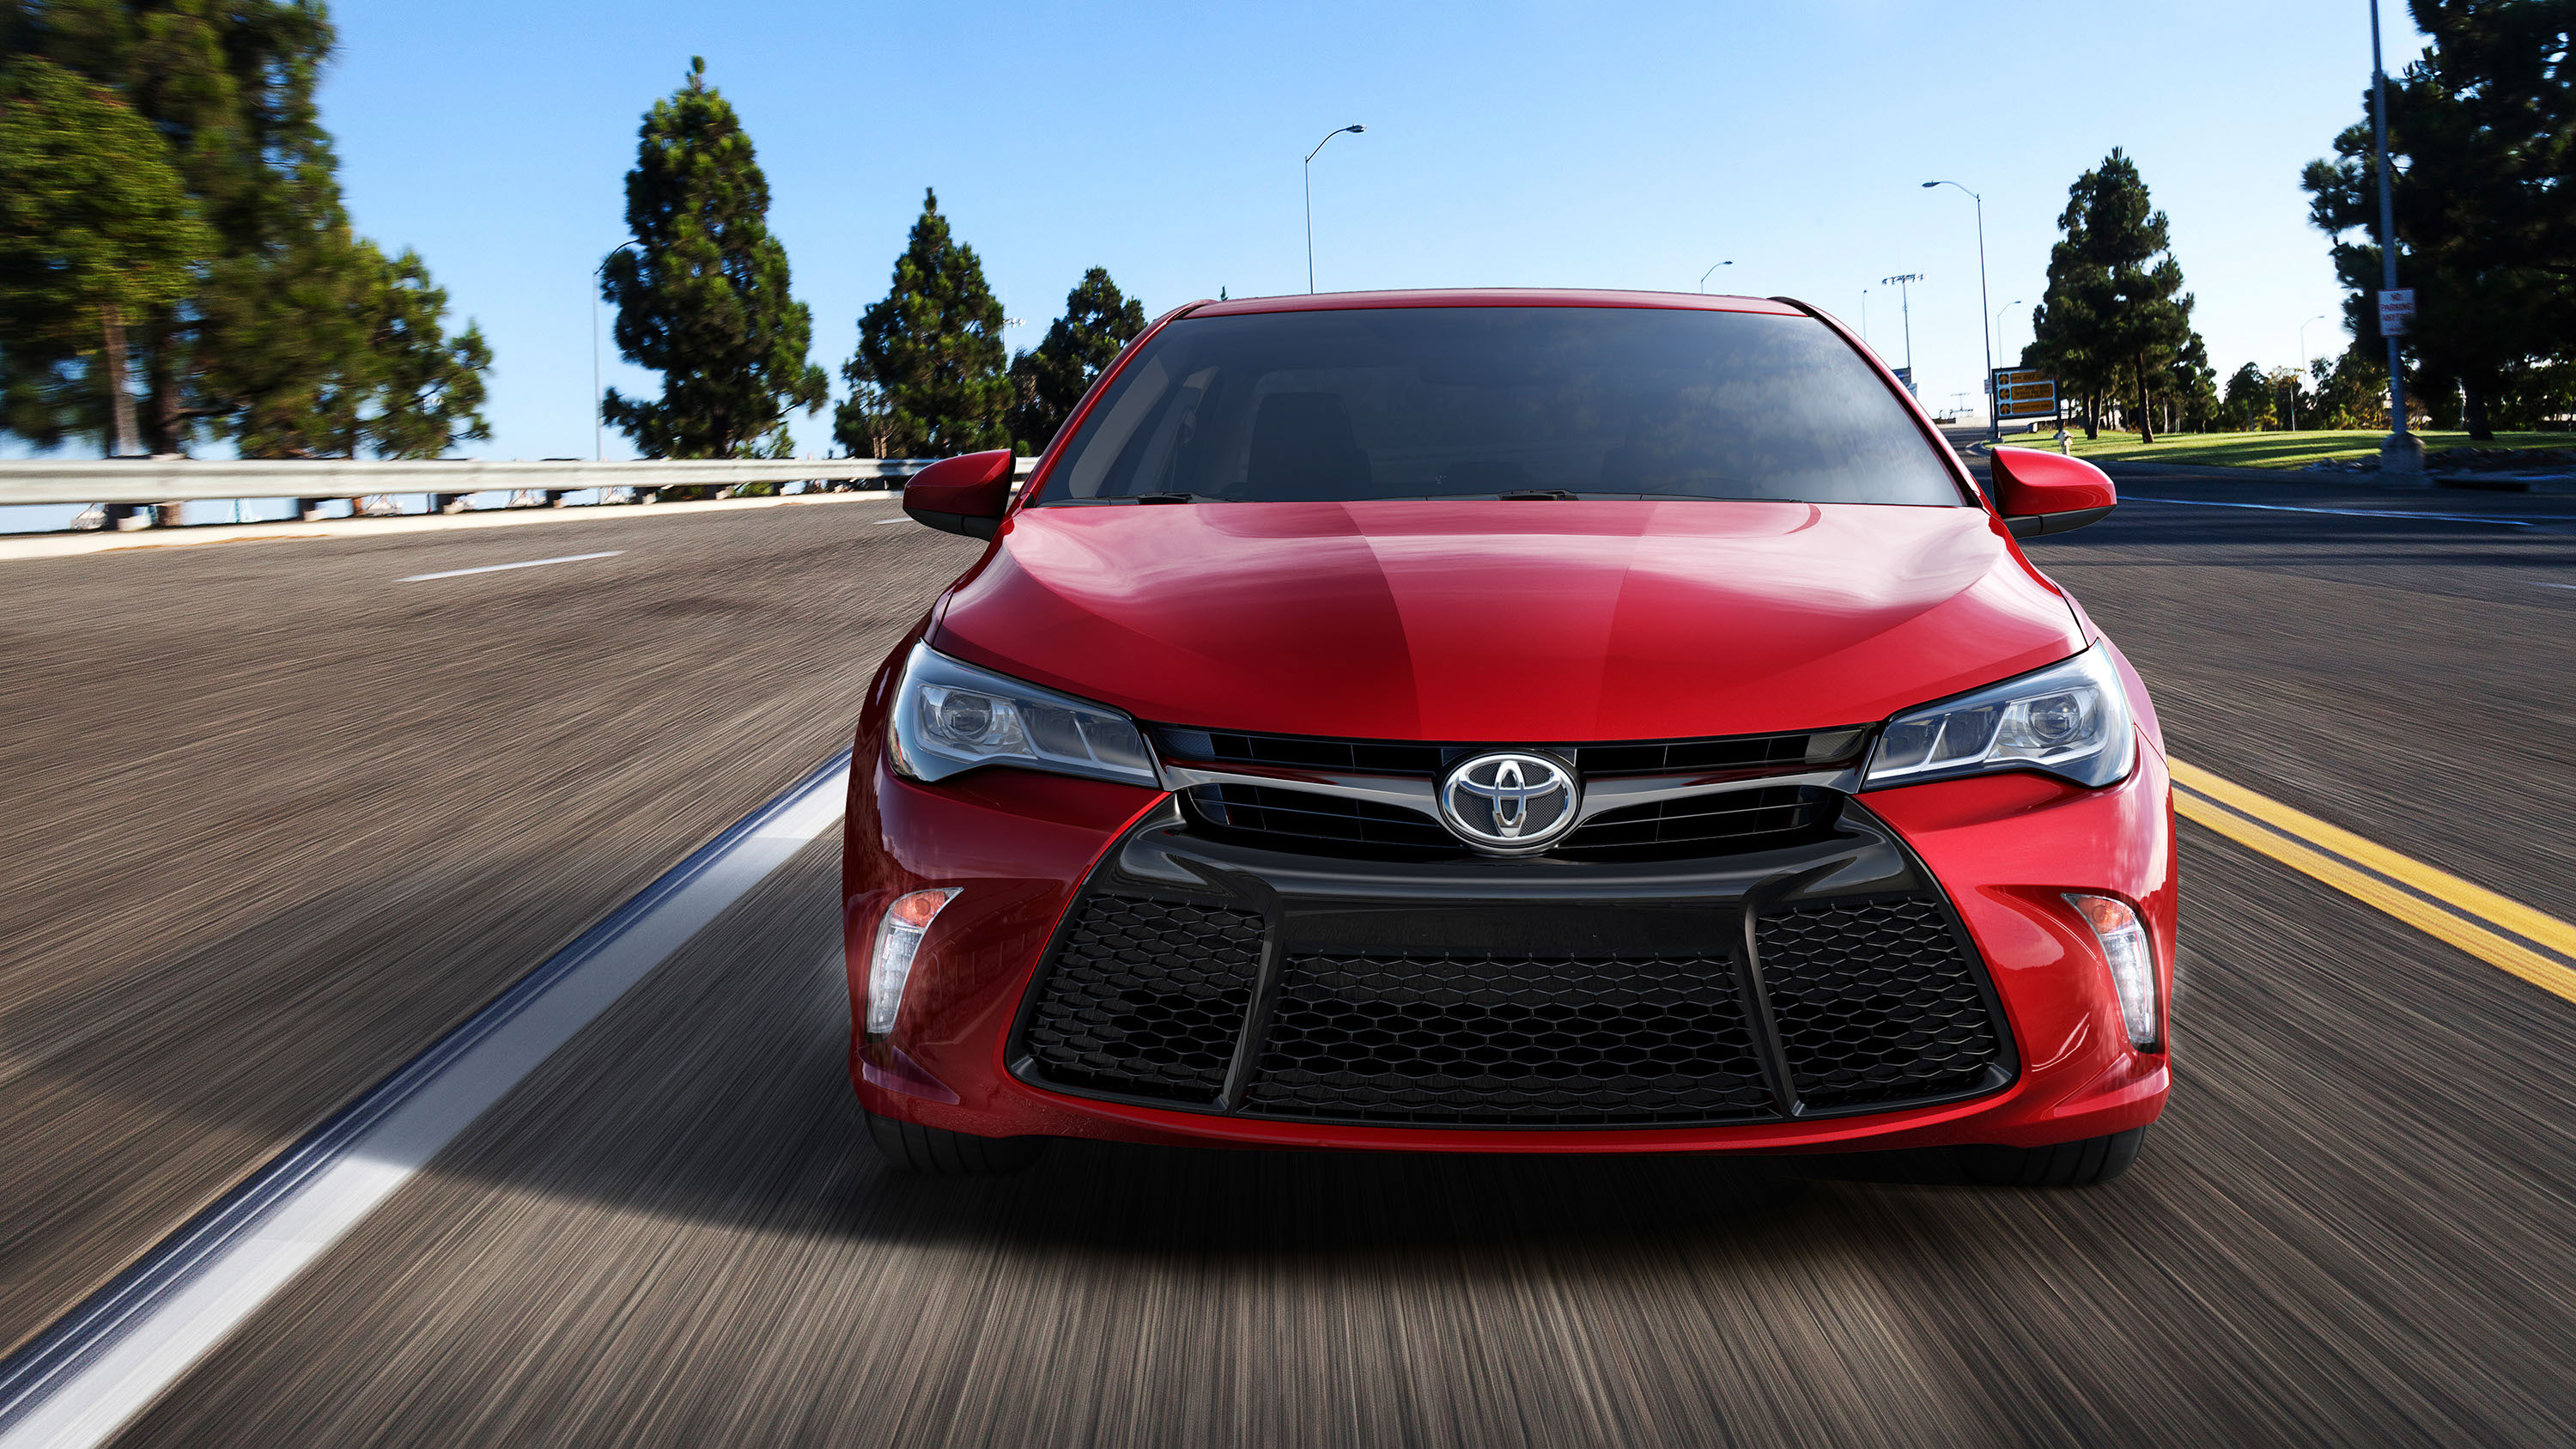 2015 Toyota Camry - HD Pictures @ carsinvasion.com